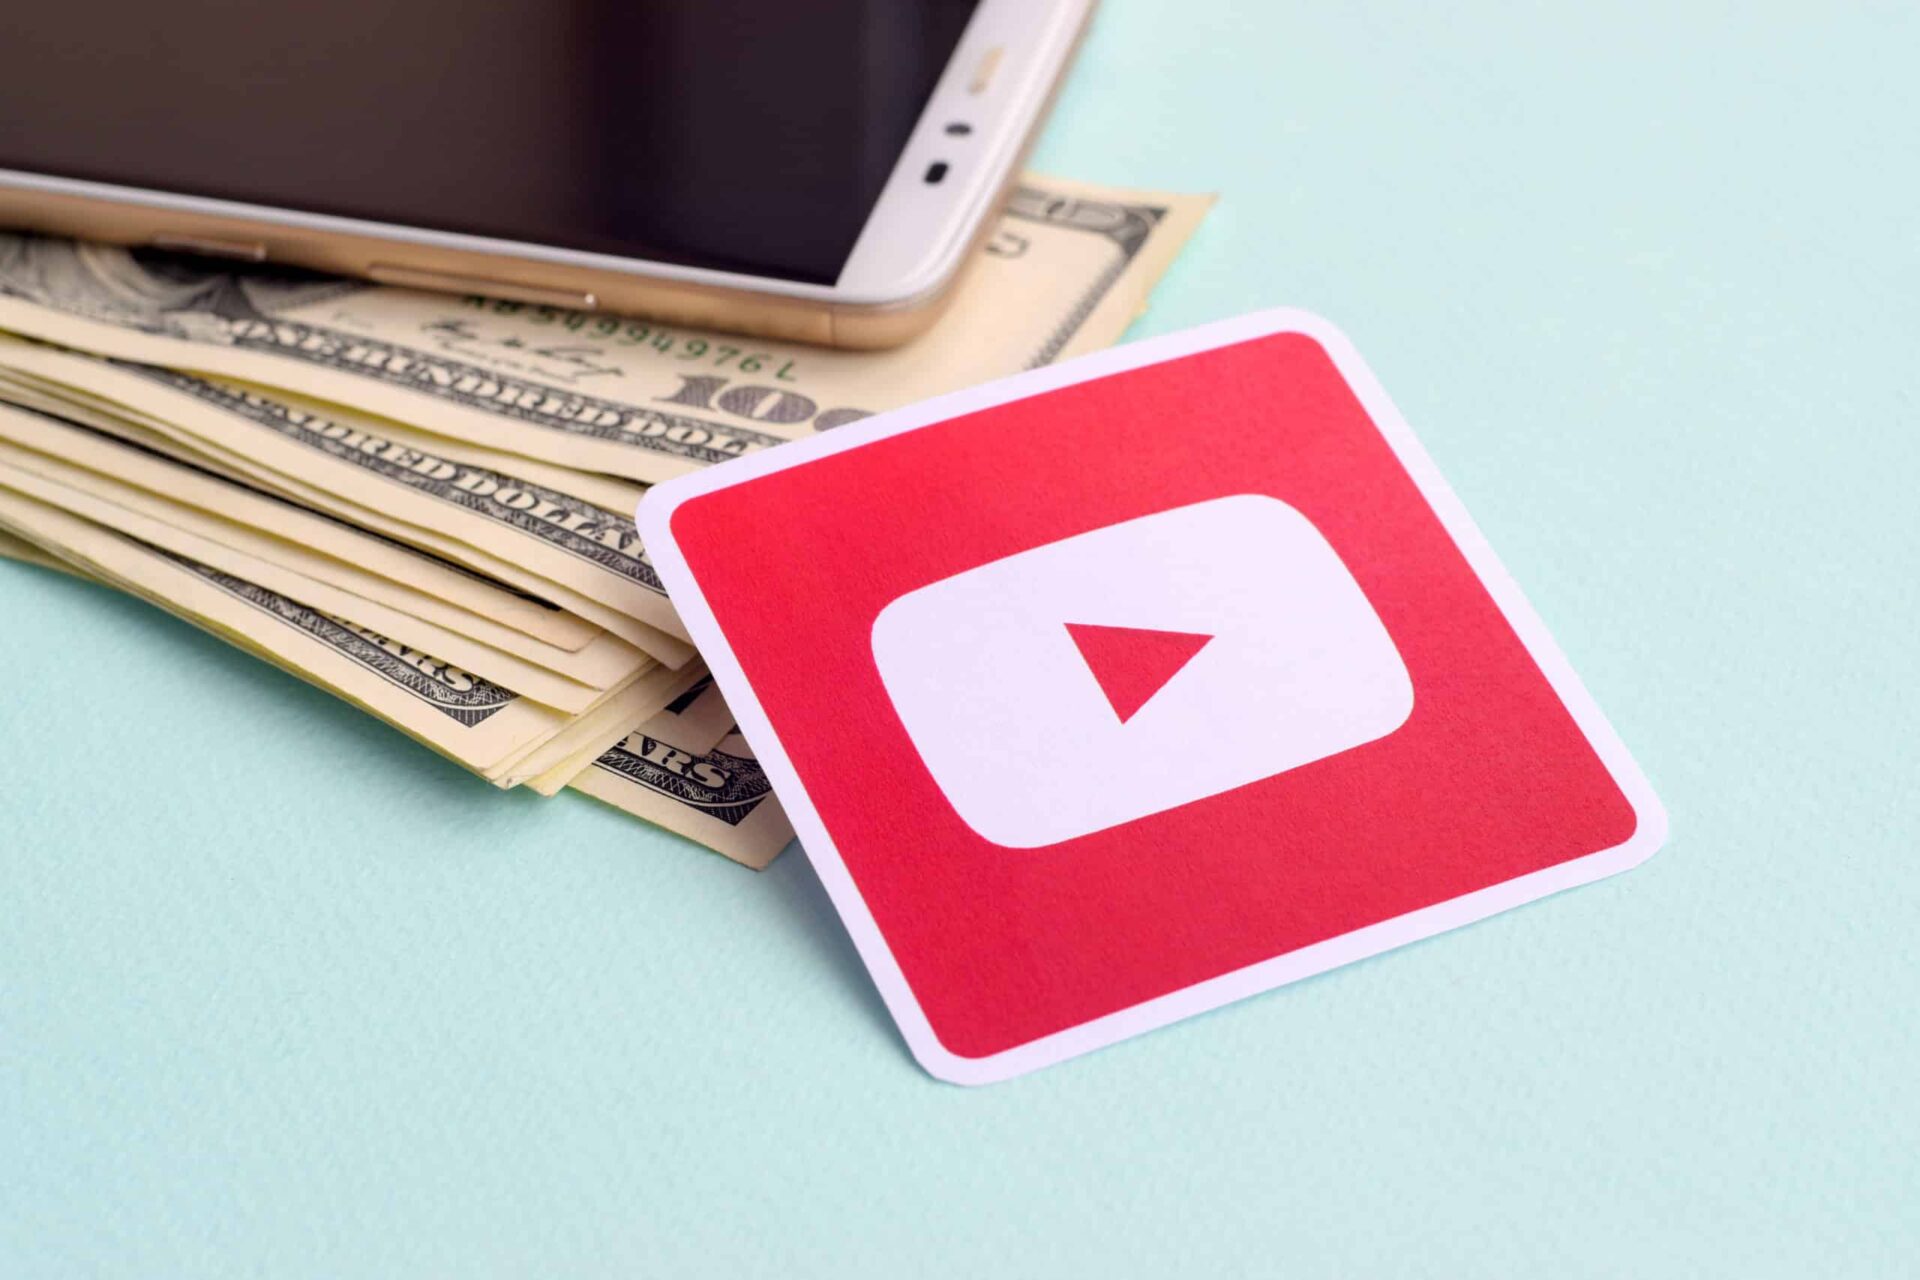 YouTube is gearing up to provide further insights and information regarding its new programs